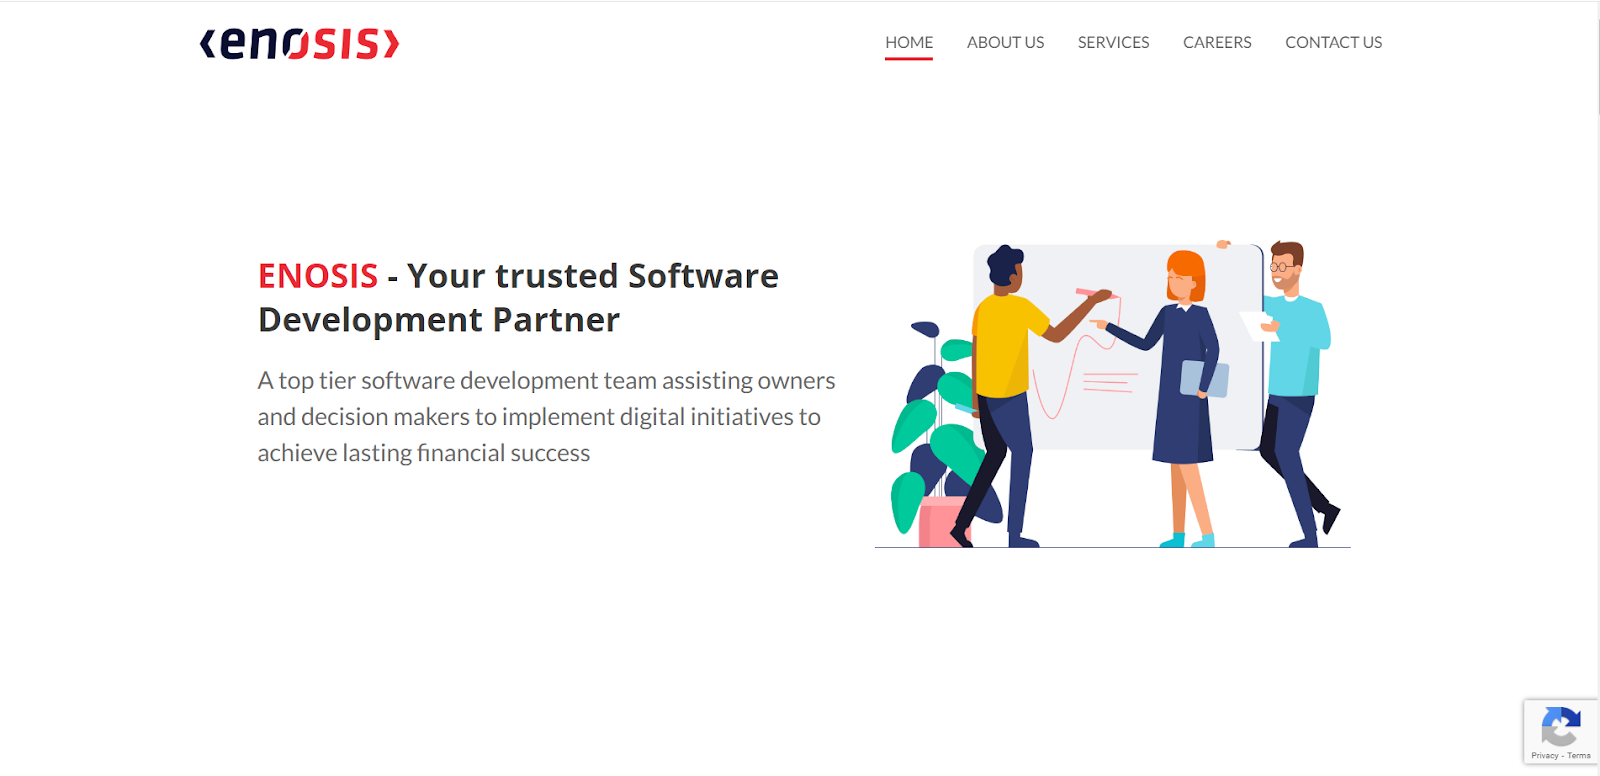 Enosis is among the best software companies in Bangladesh